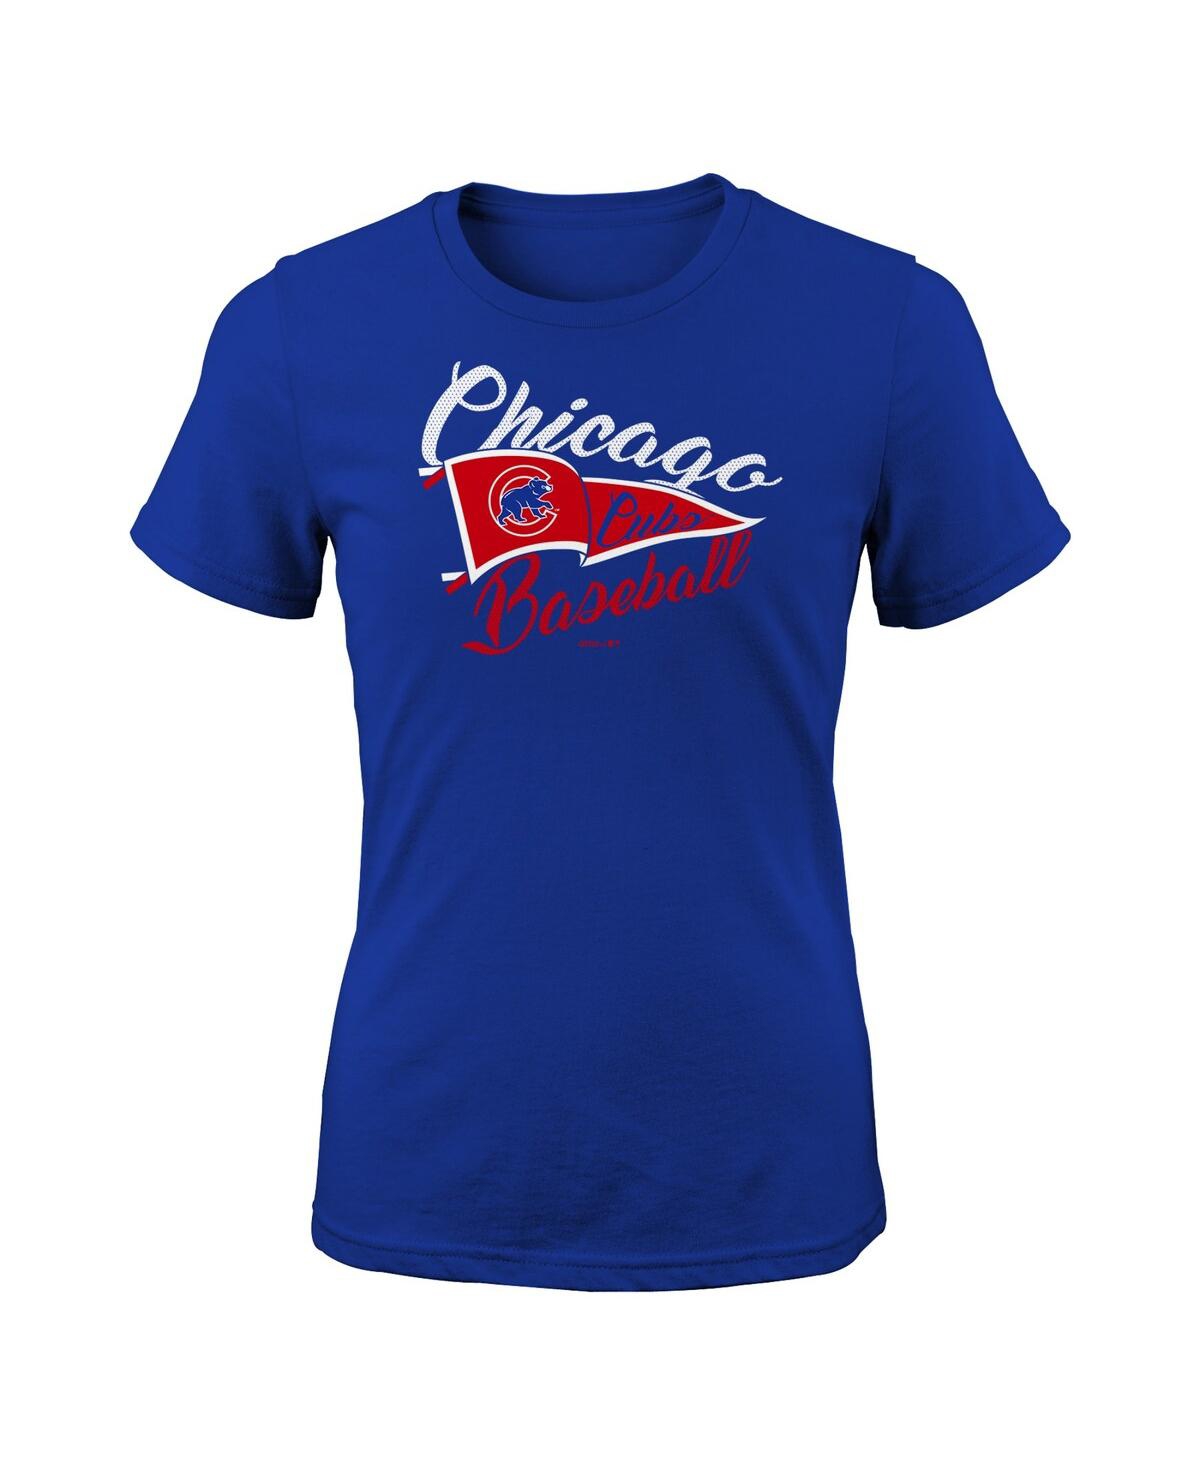 Outerstuff Chicago Cubs Youth Girls Fly The Flag T-Shirt 14